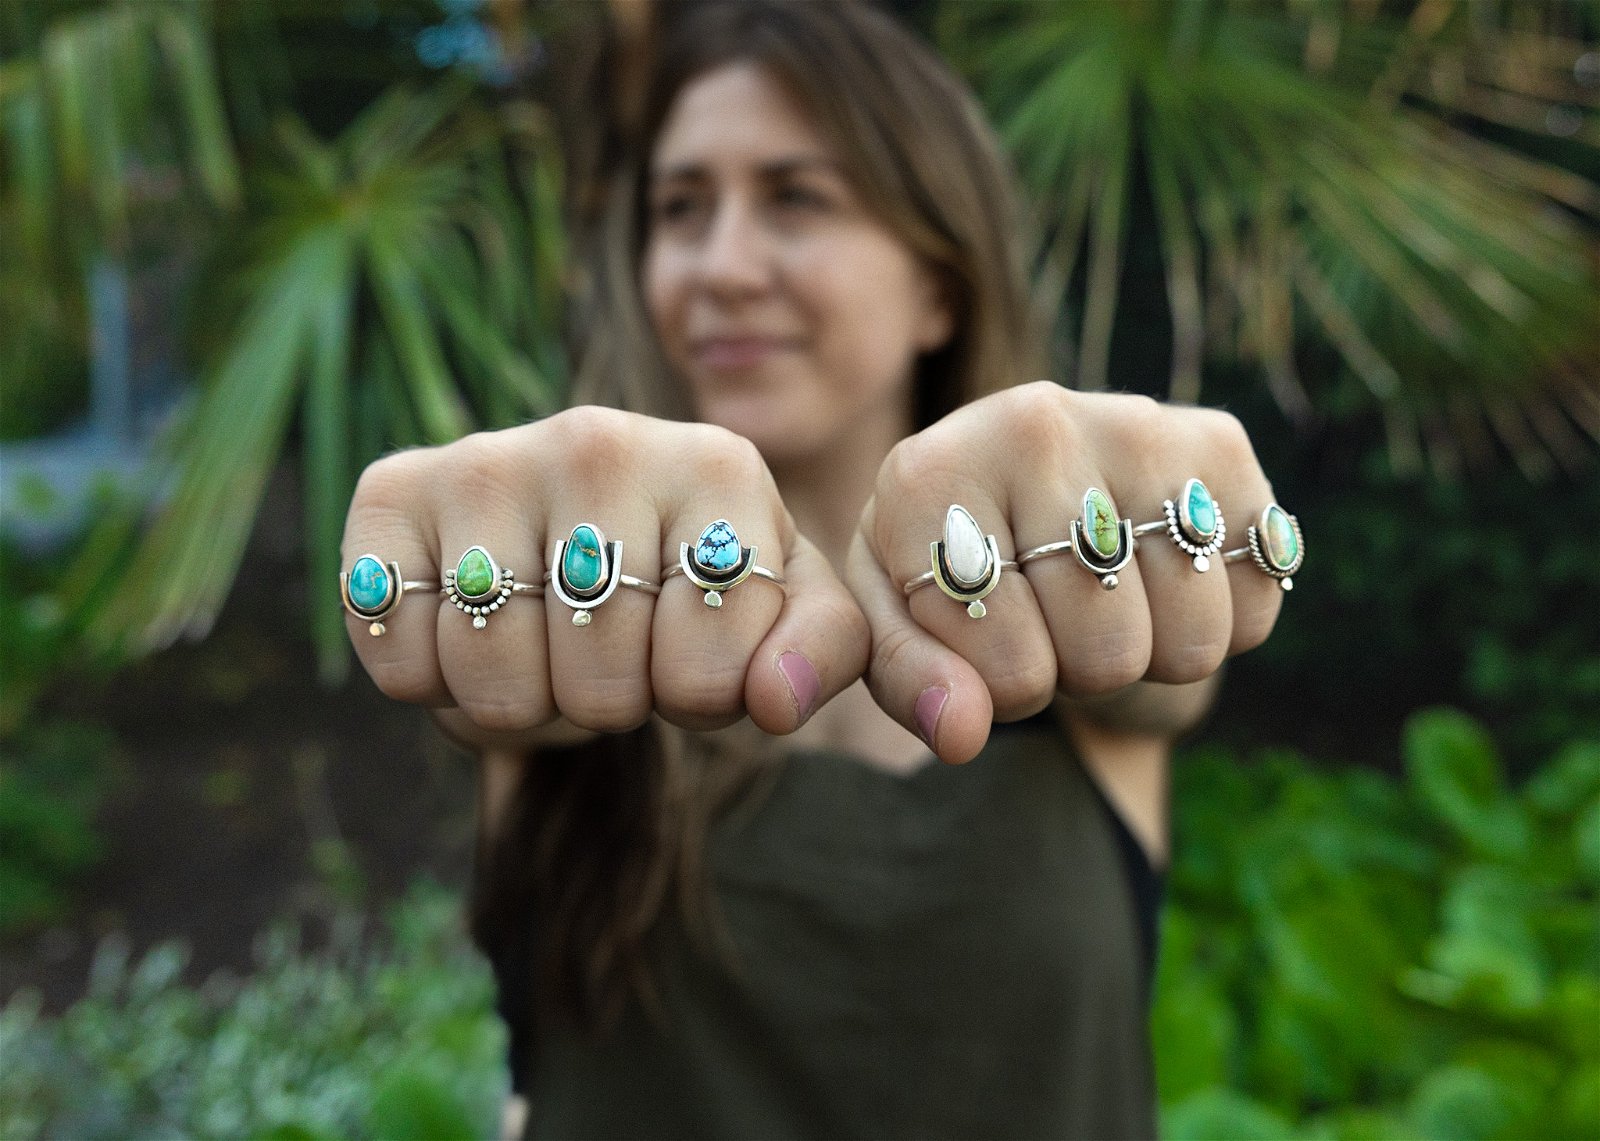 portland jewelry designer with turquoise rings to buy online